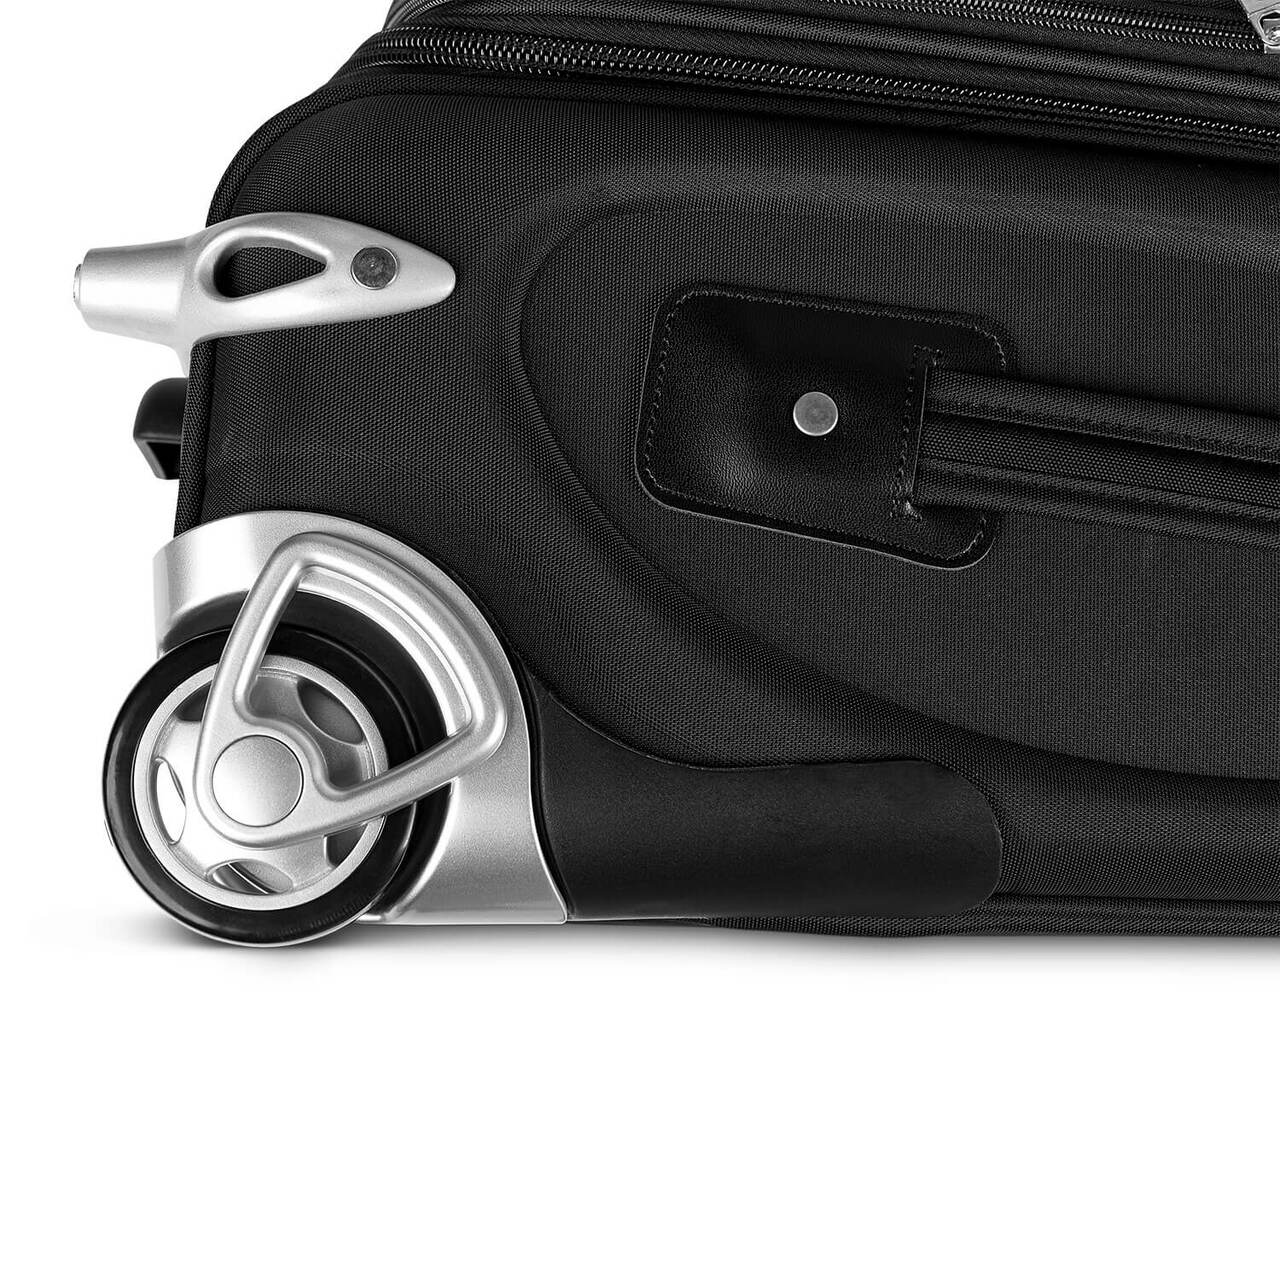 Penguins Carry On Luggage | Pittsburgh Penguins Rolling Carry On Luggage